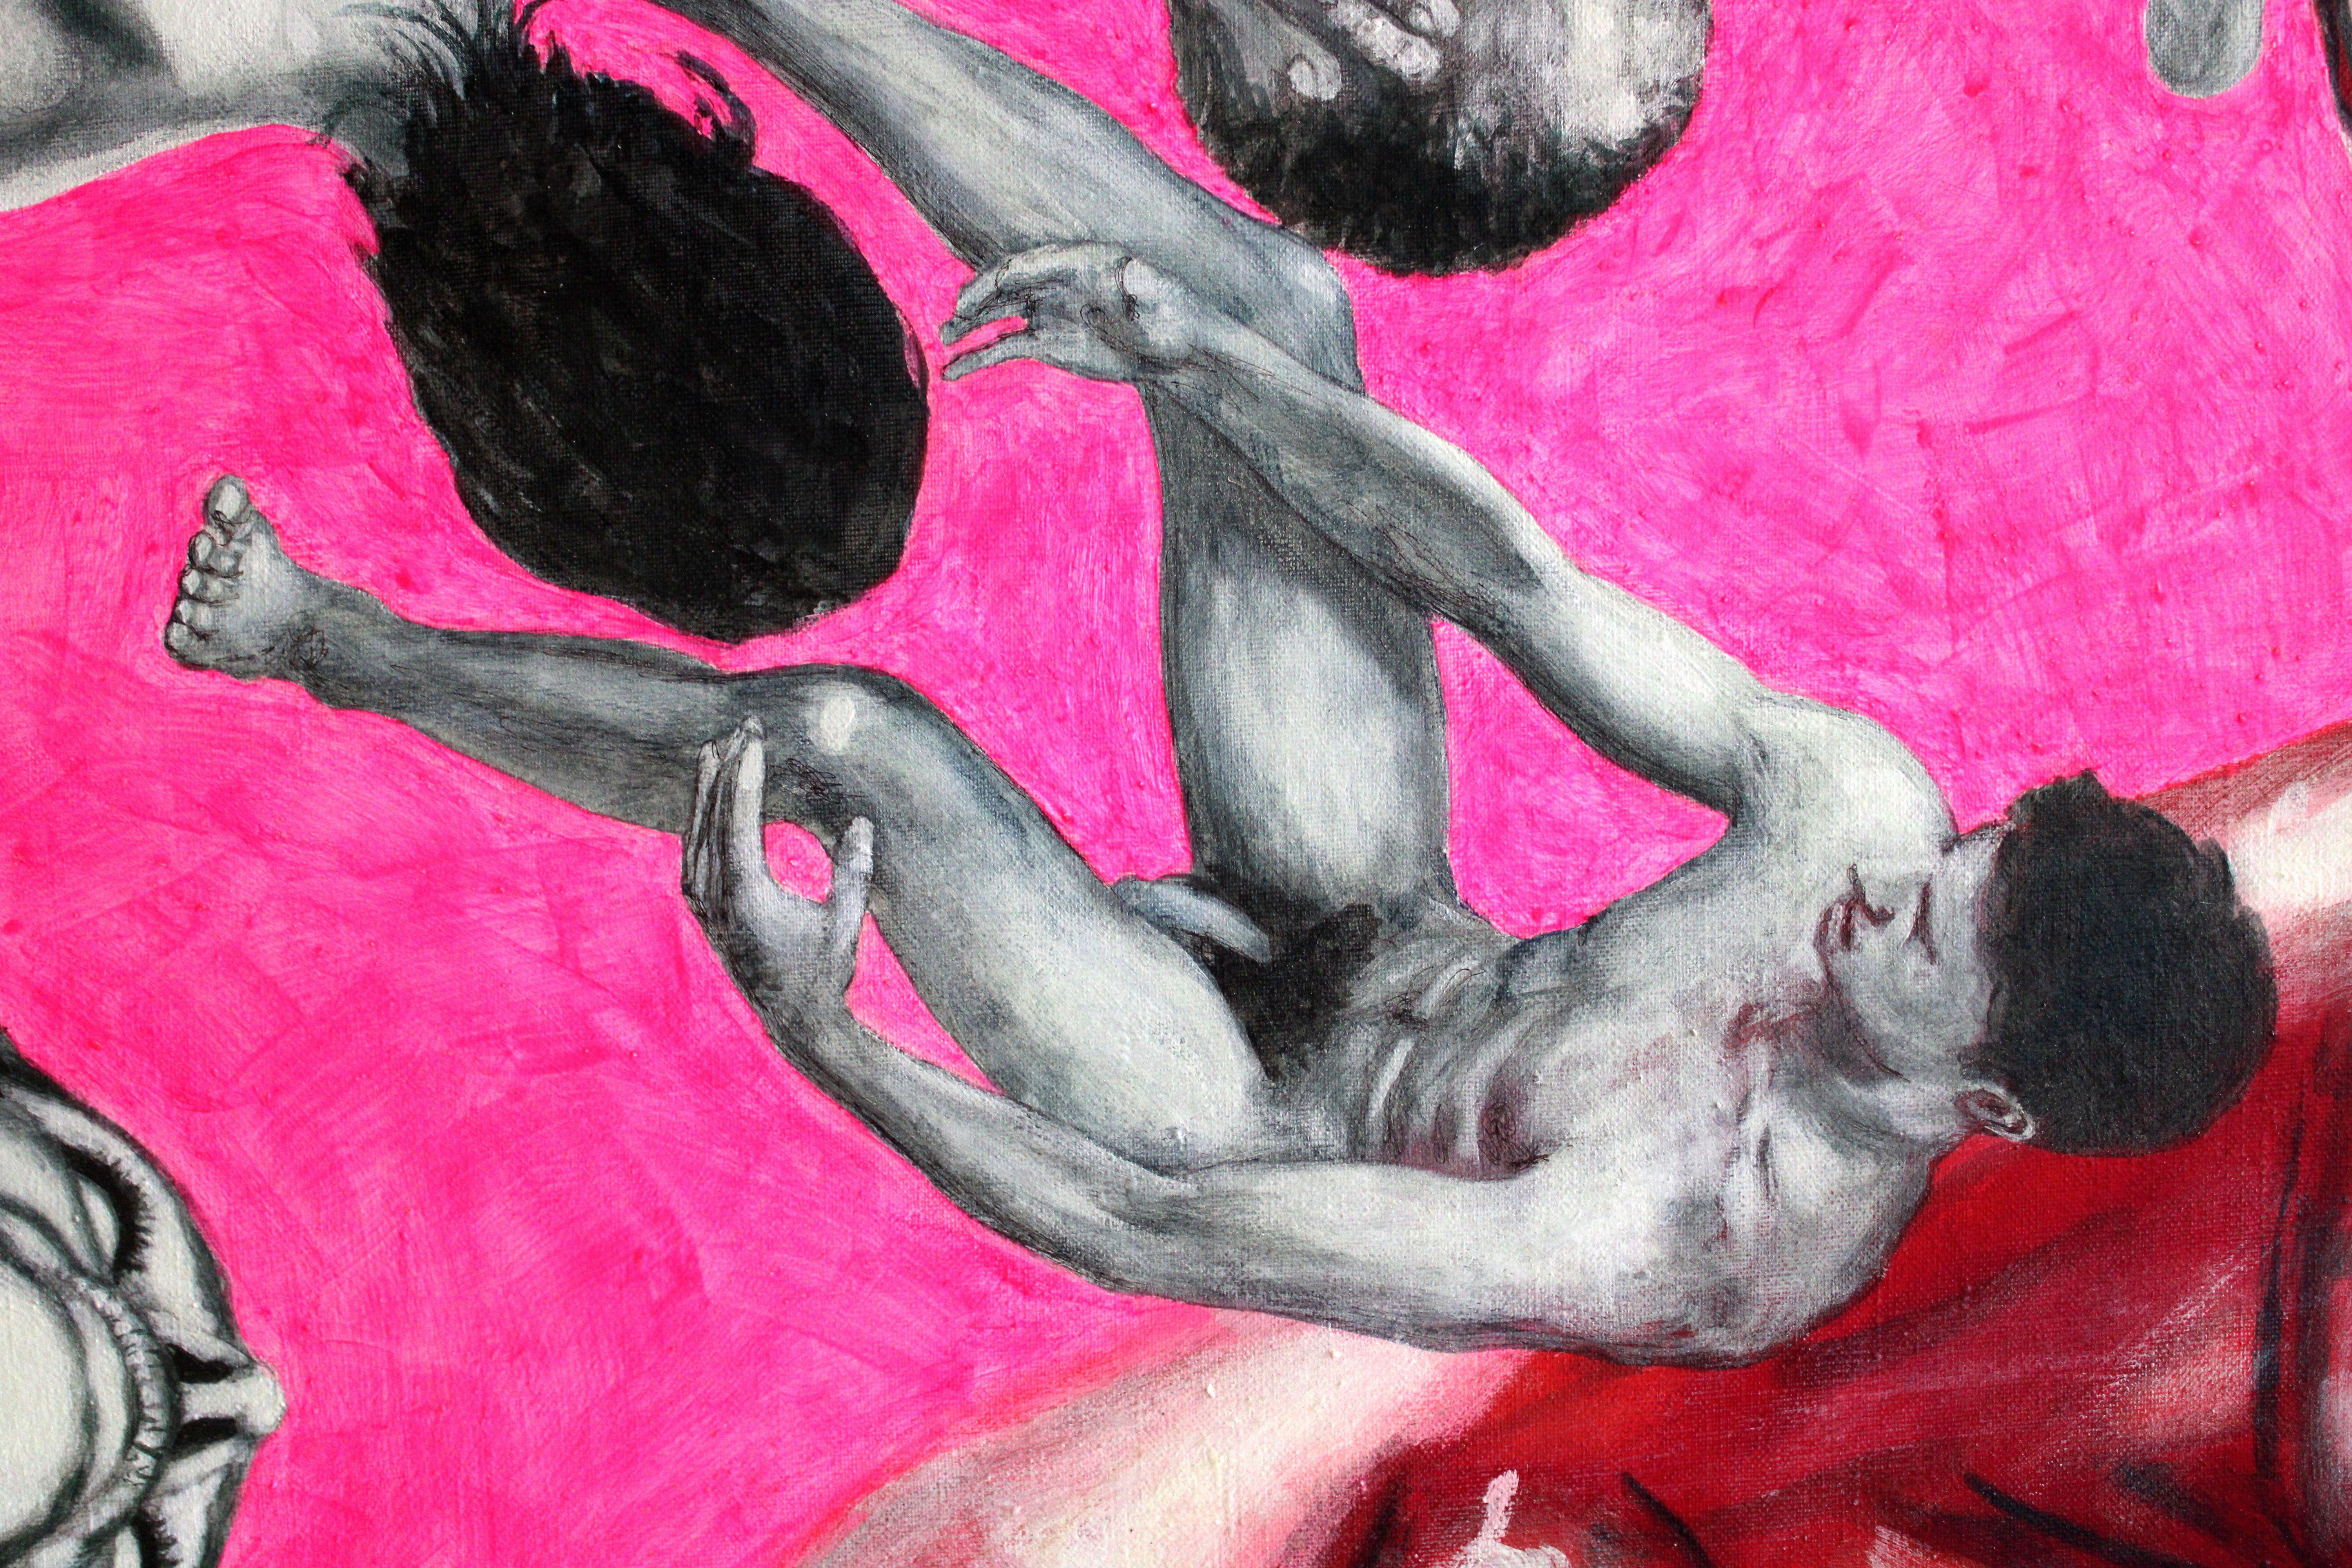 Out of sight 2  2006, canvas, mixed media, 180x140 cm - Pink Figurative Painting by Juris Utans